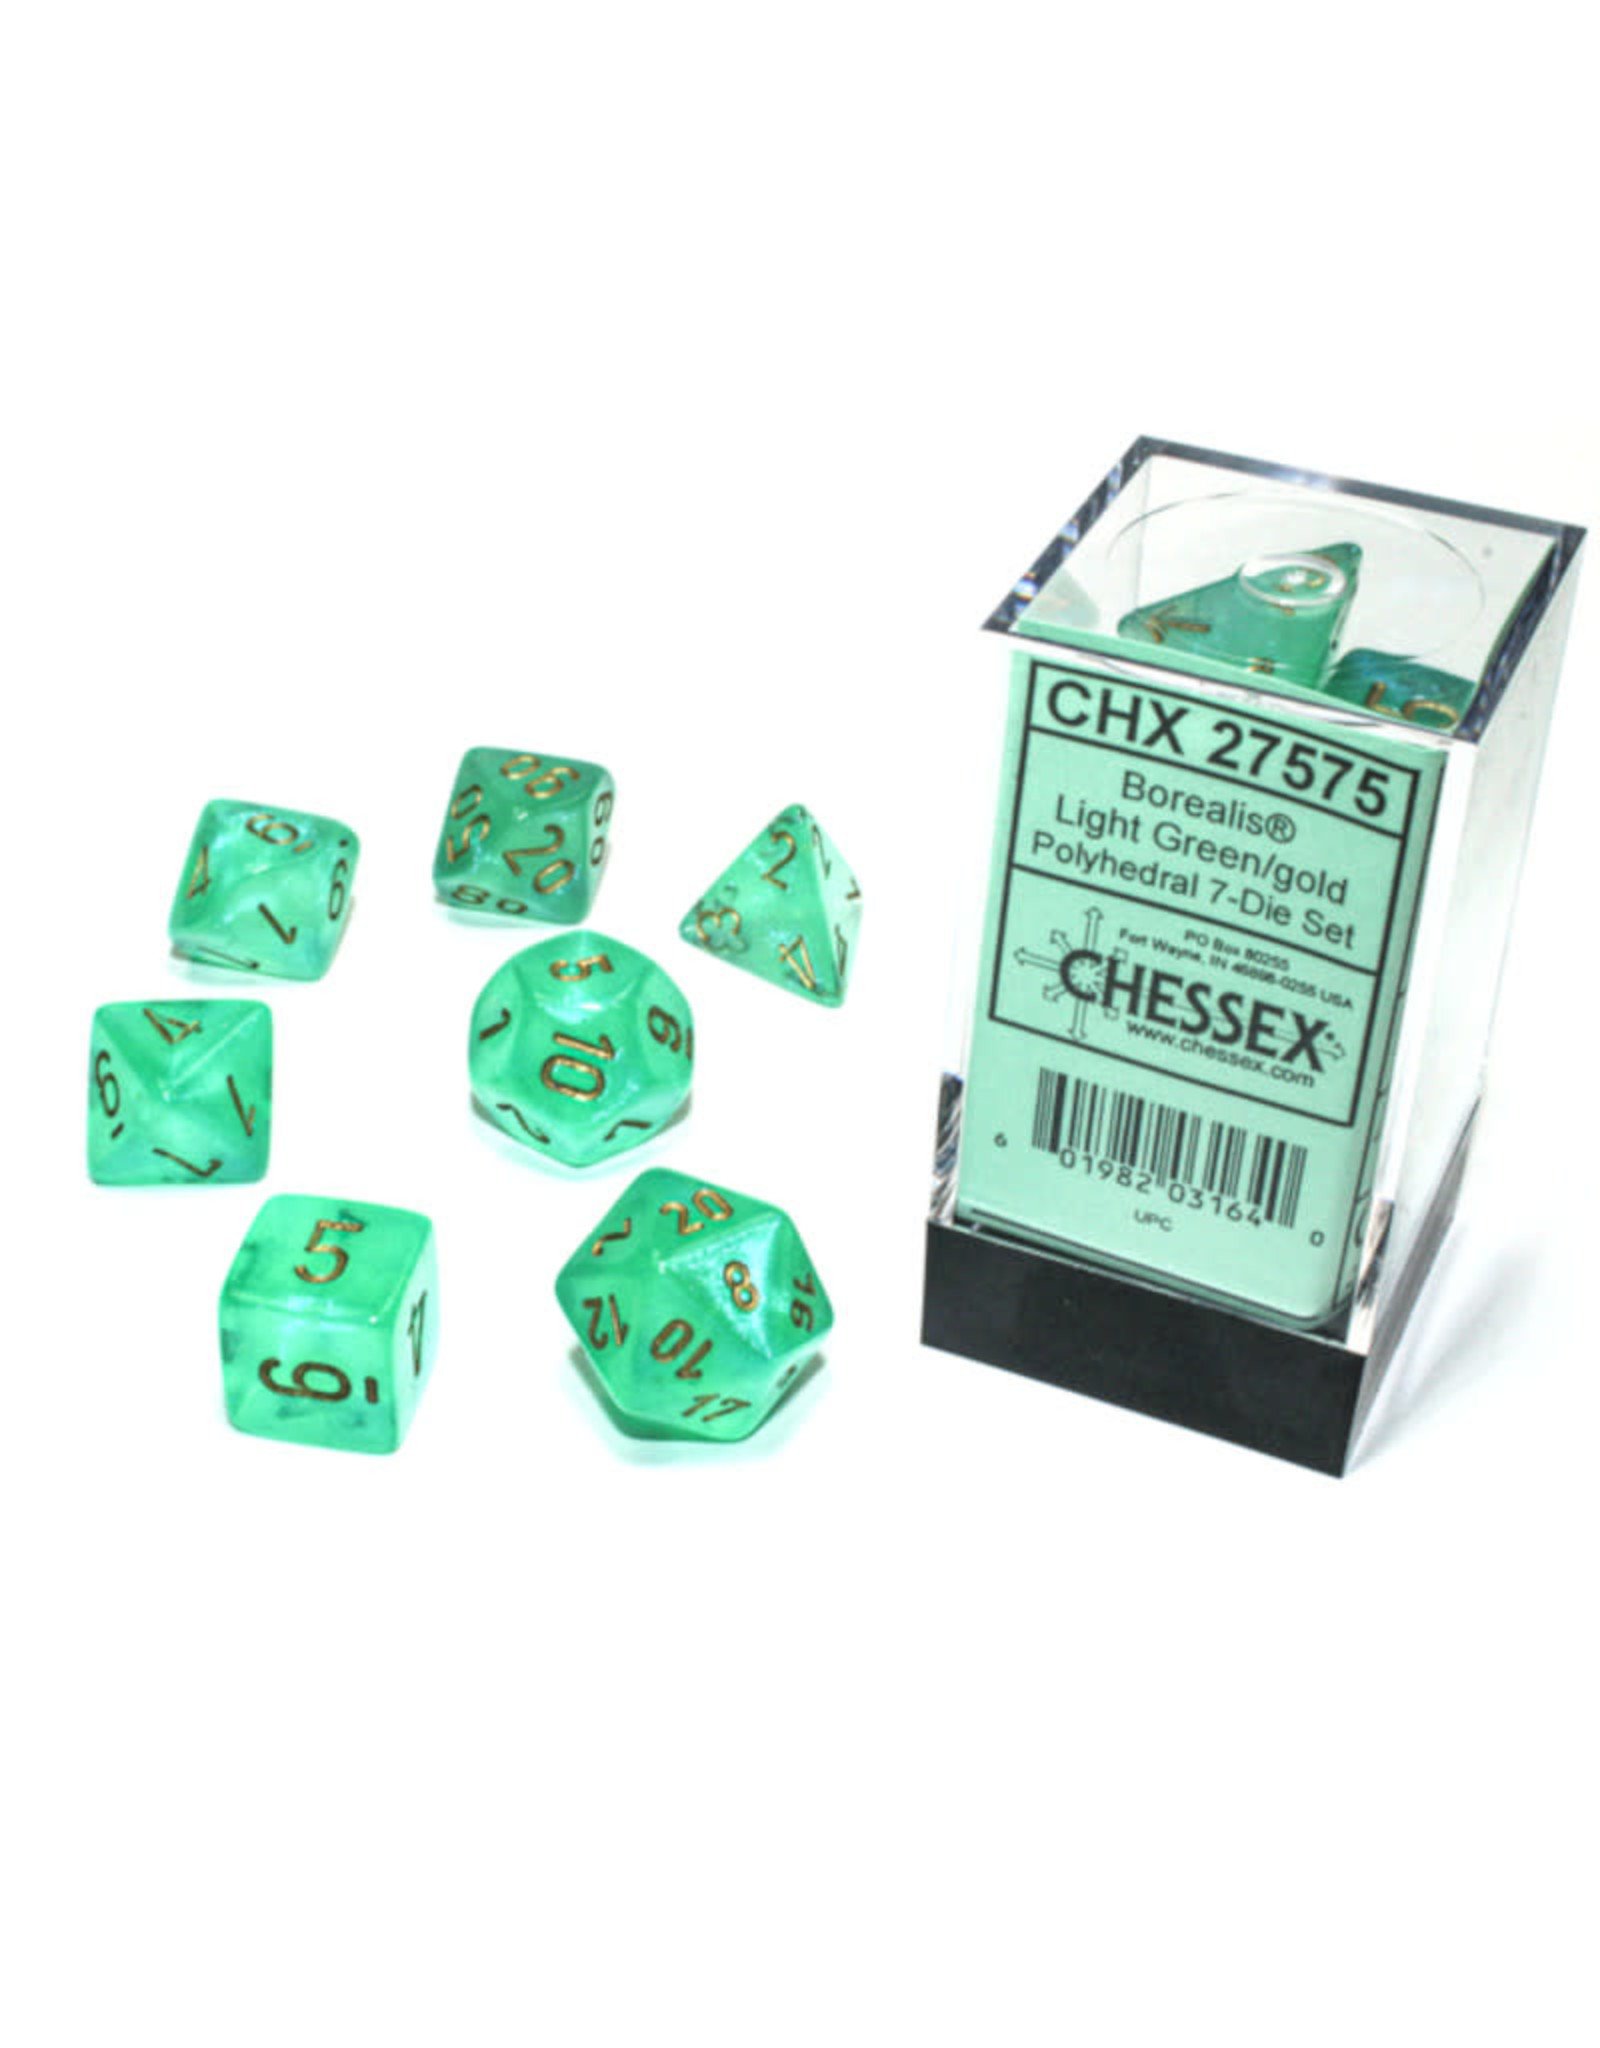 Chessex Polyhedral Dice Set: Borealis Light Green/Gold (7)